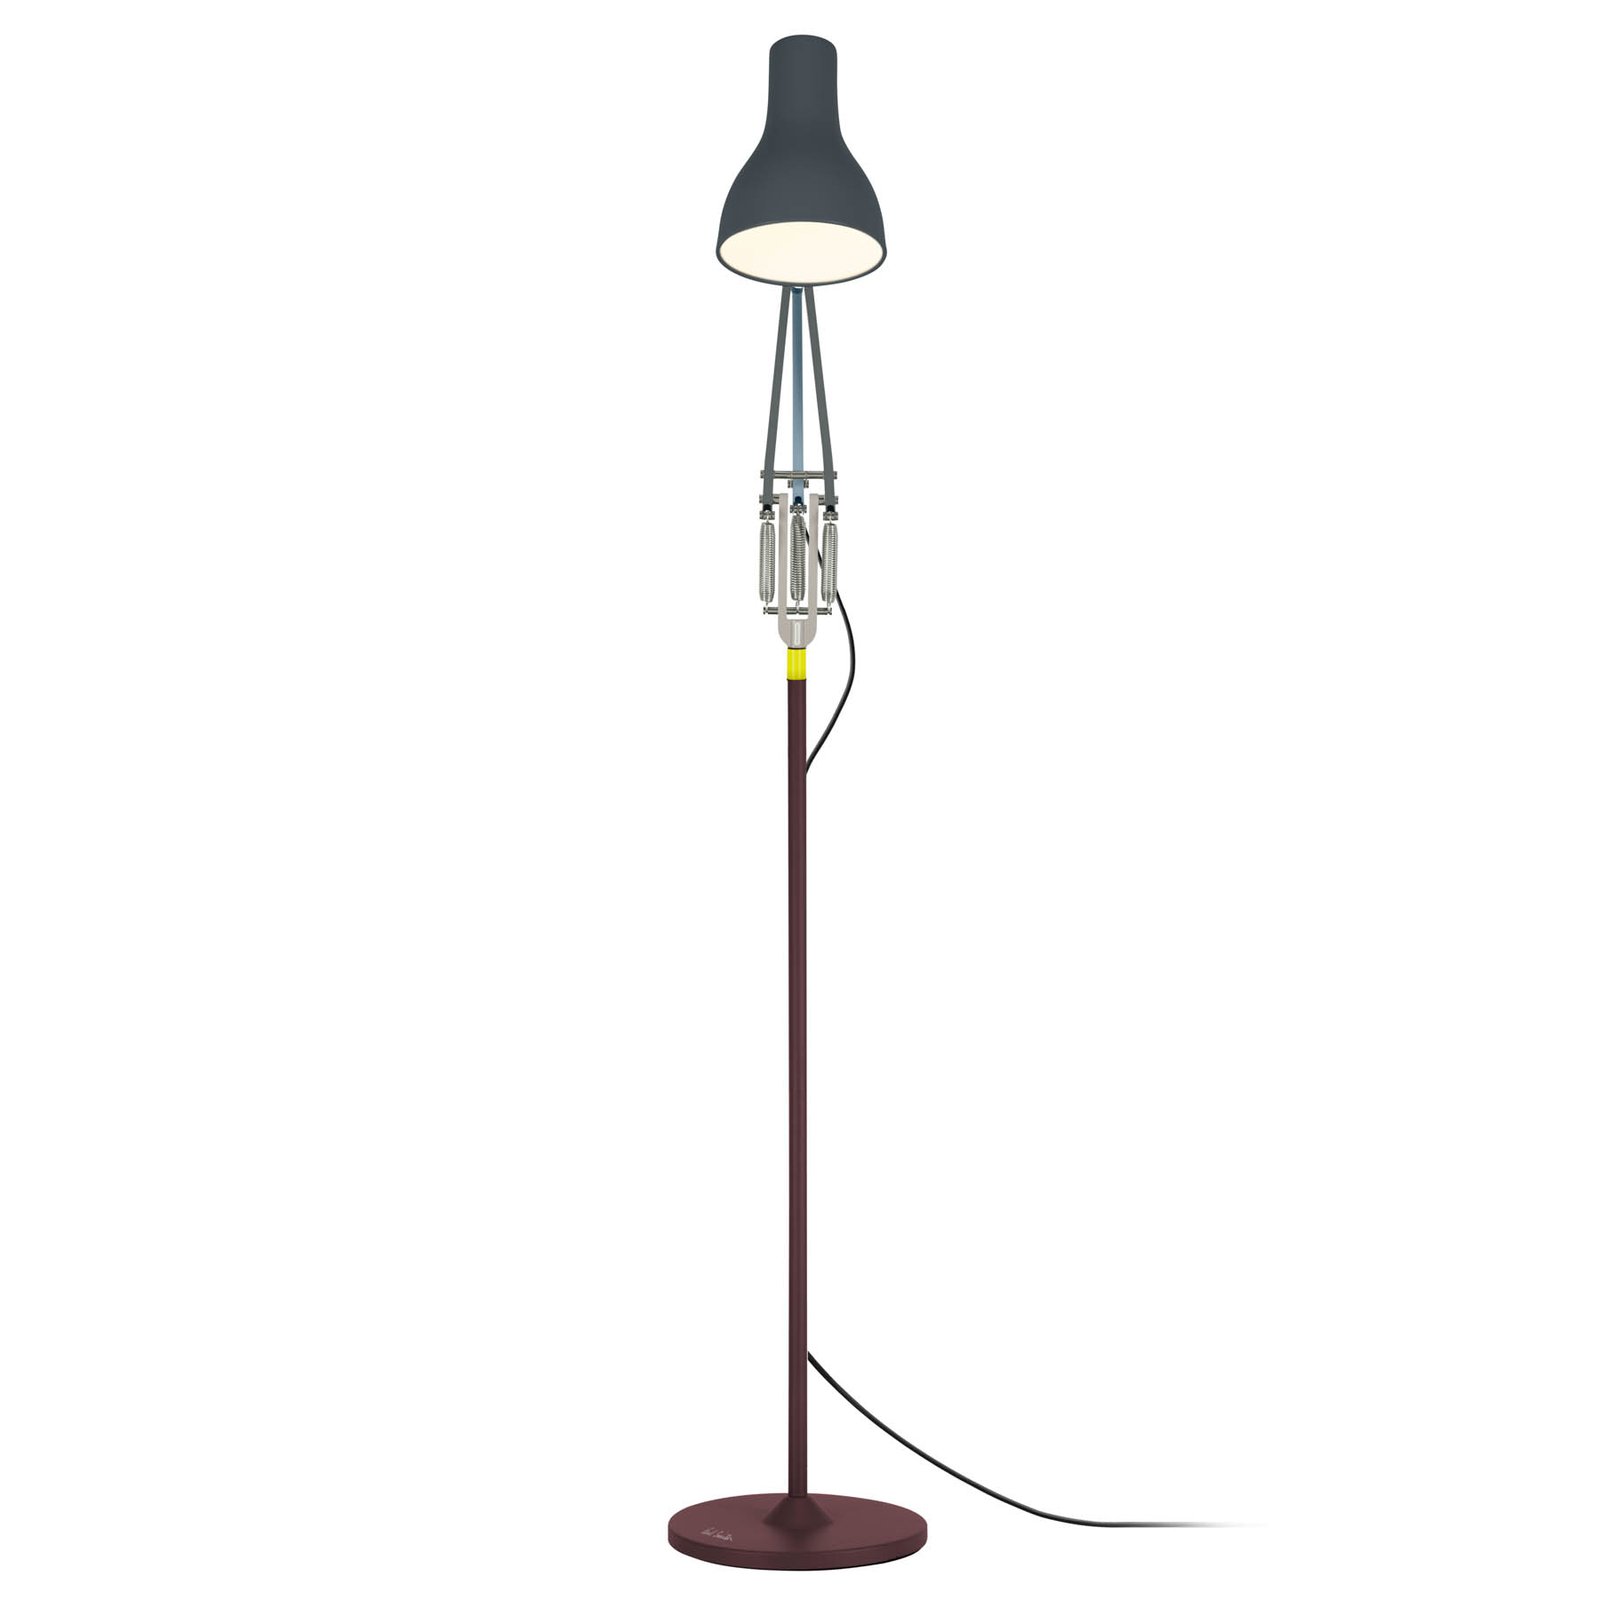 Anglepoise Type 75 vloerlamp Paul Smith Edition 4